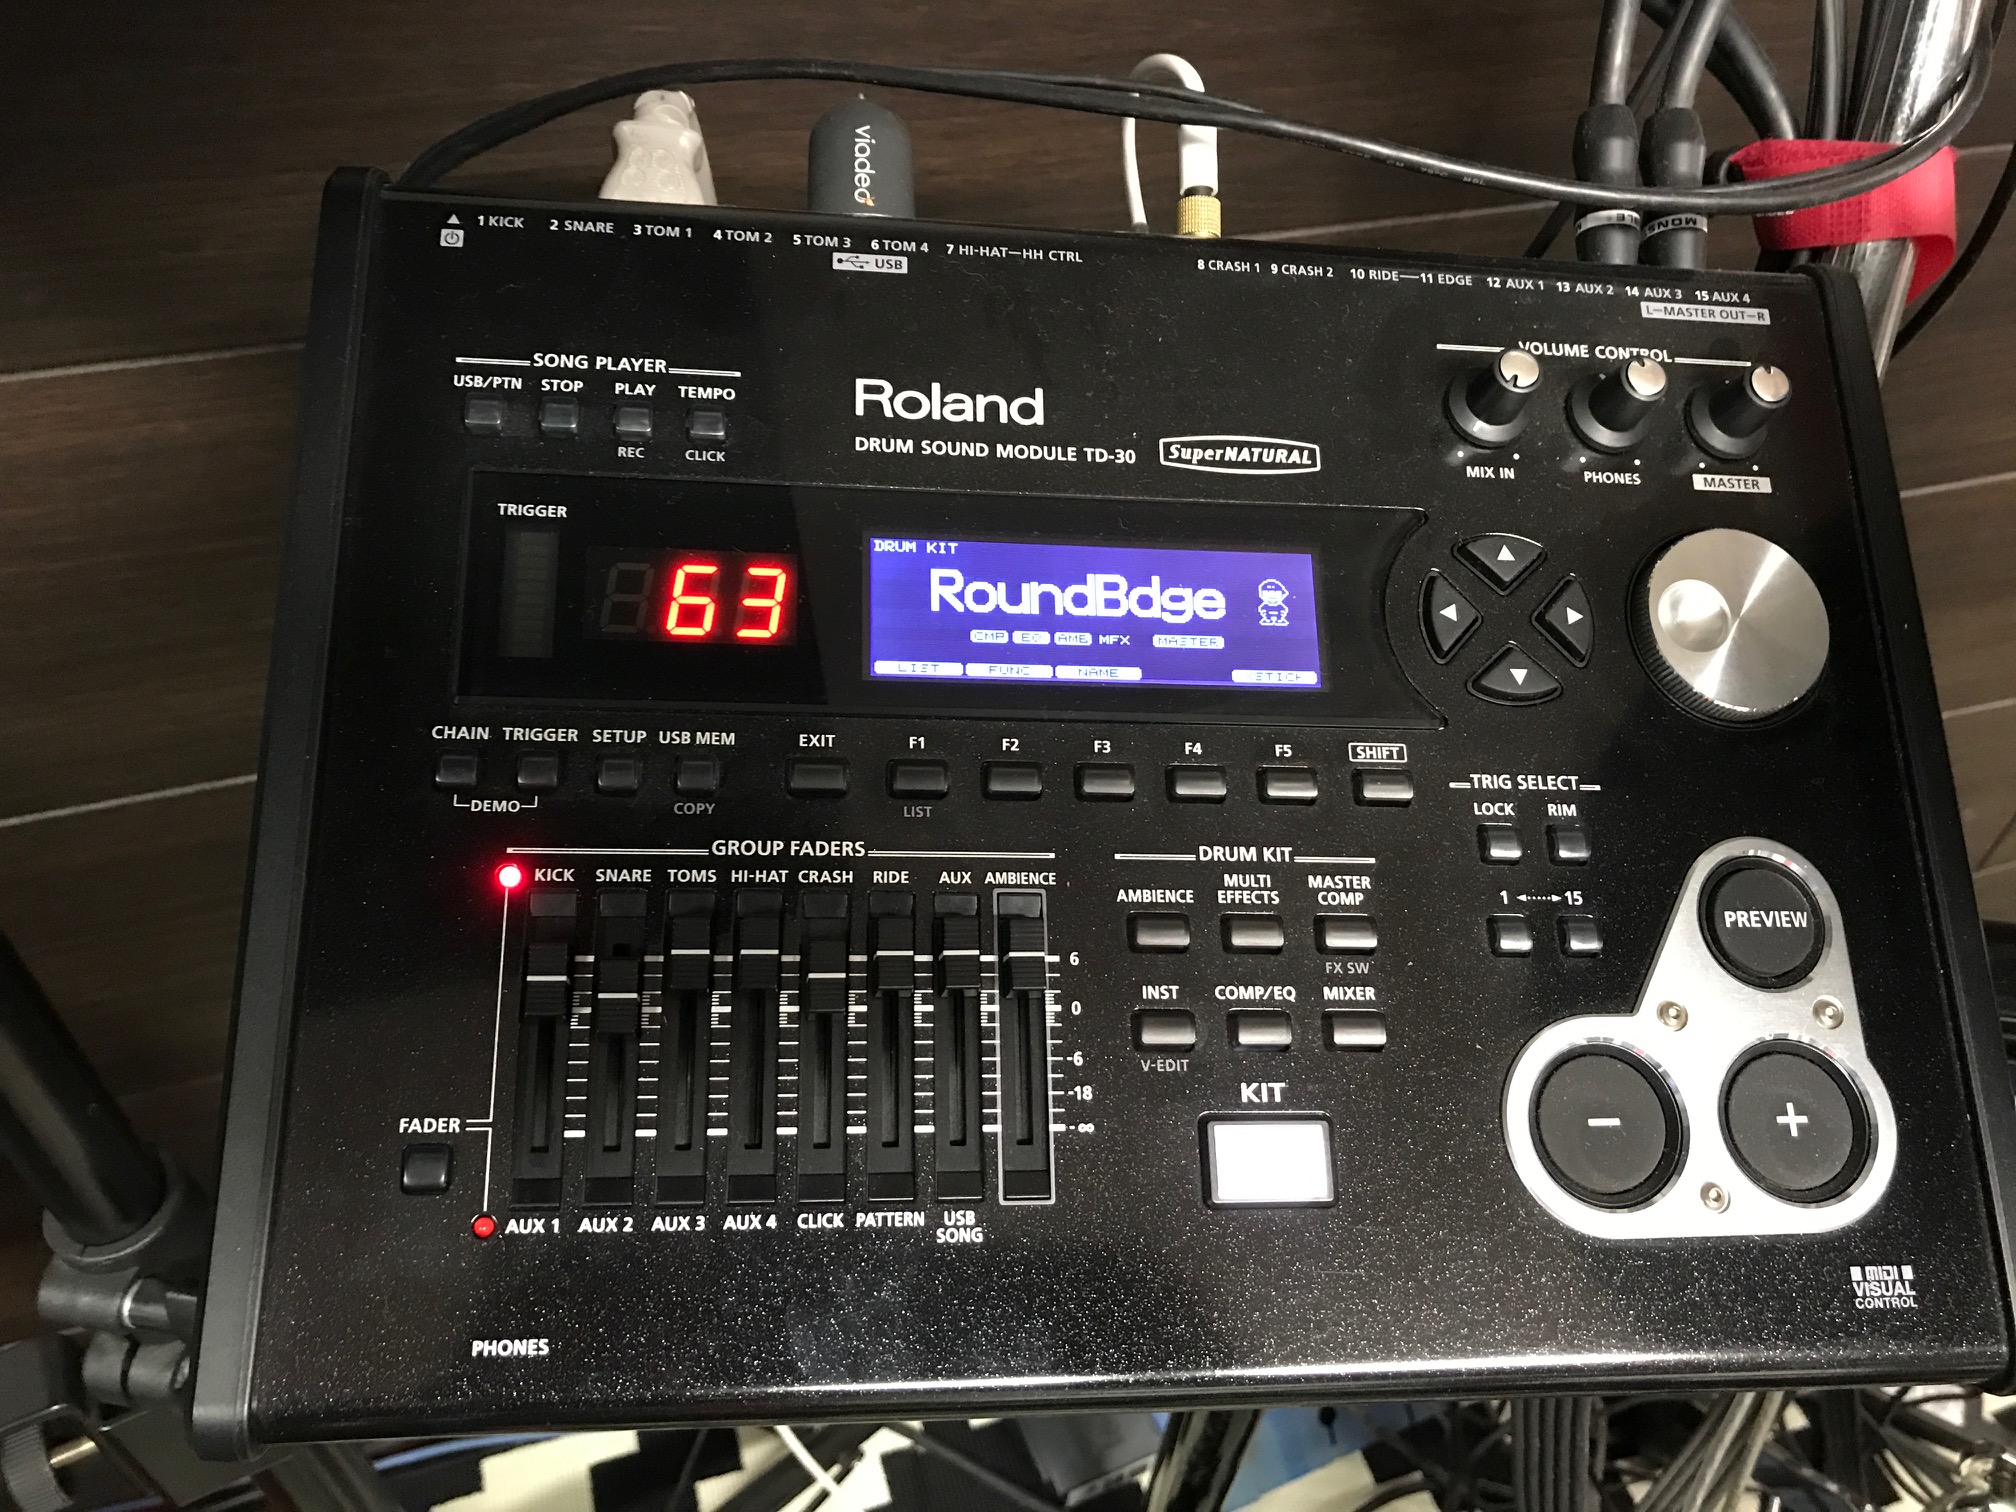 Roland SRX 01 Dynamic Drum Kits Expansion Board. Master out